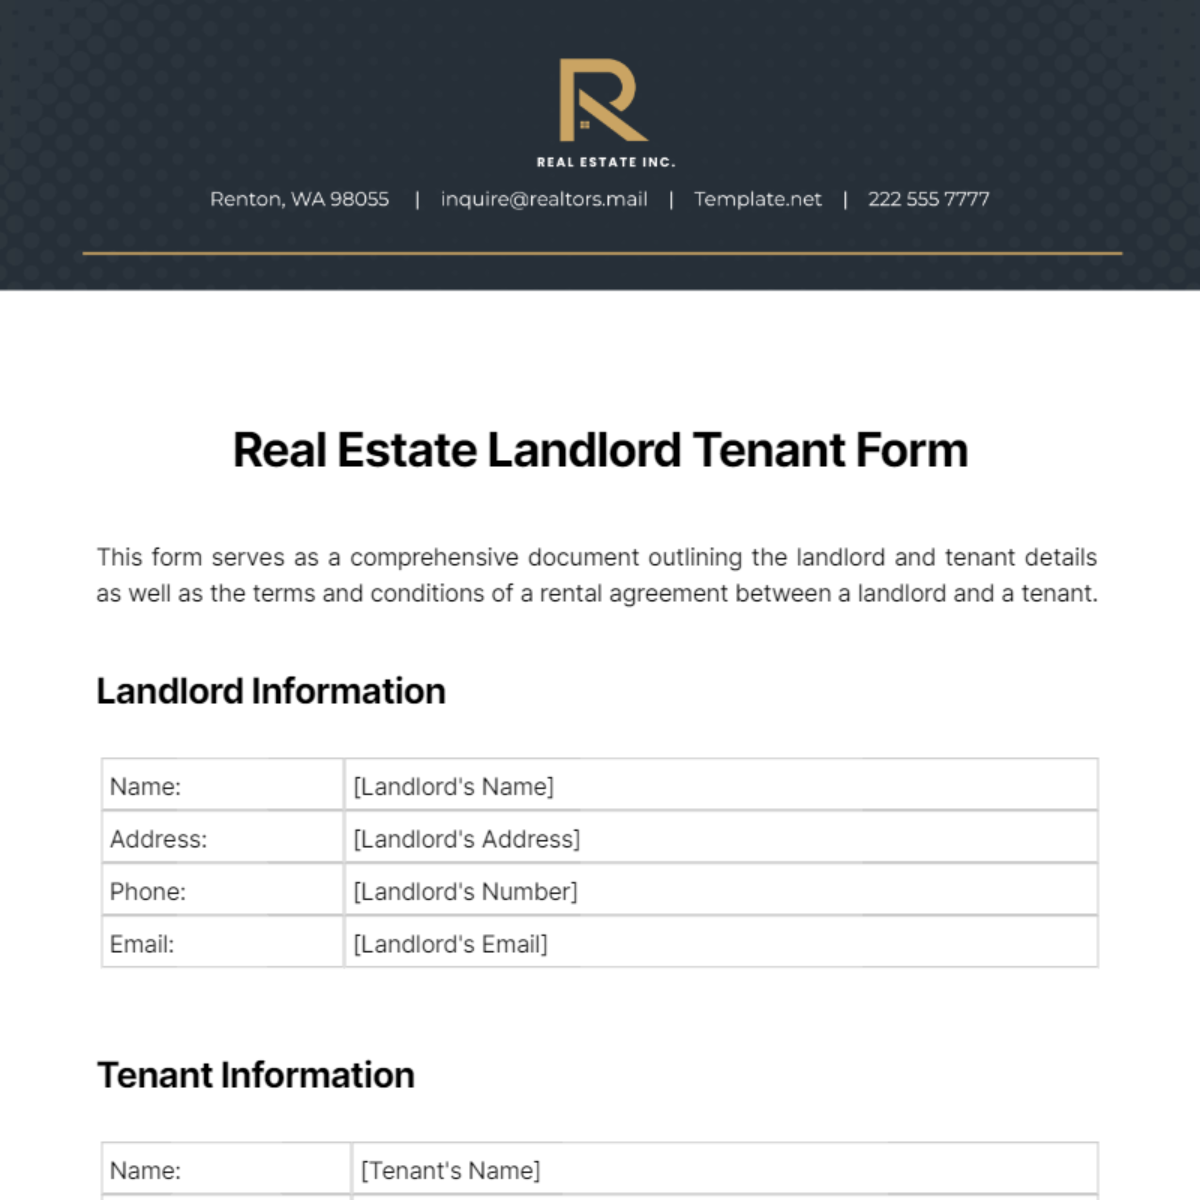 Real Estate Landlord Tenant Form Template